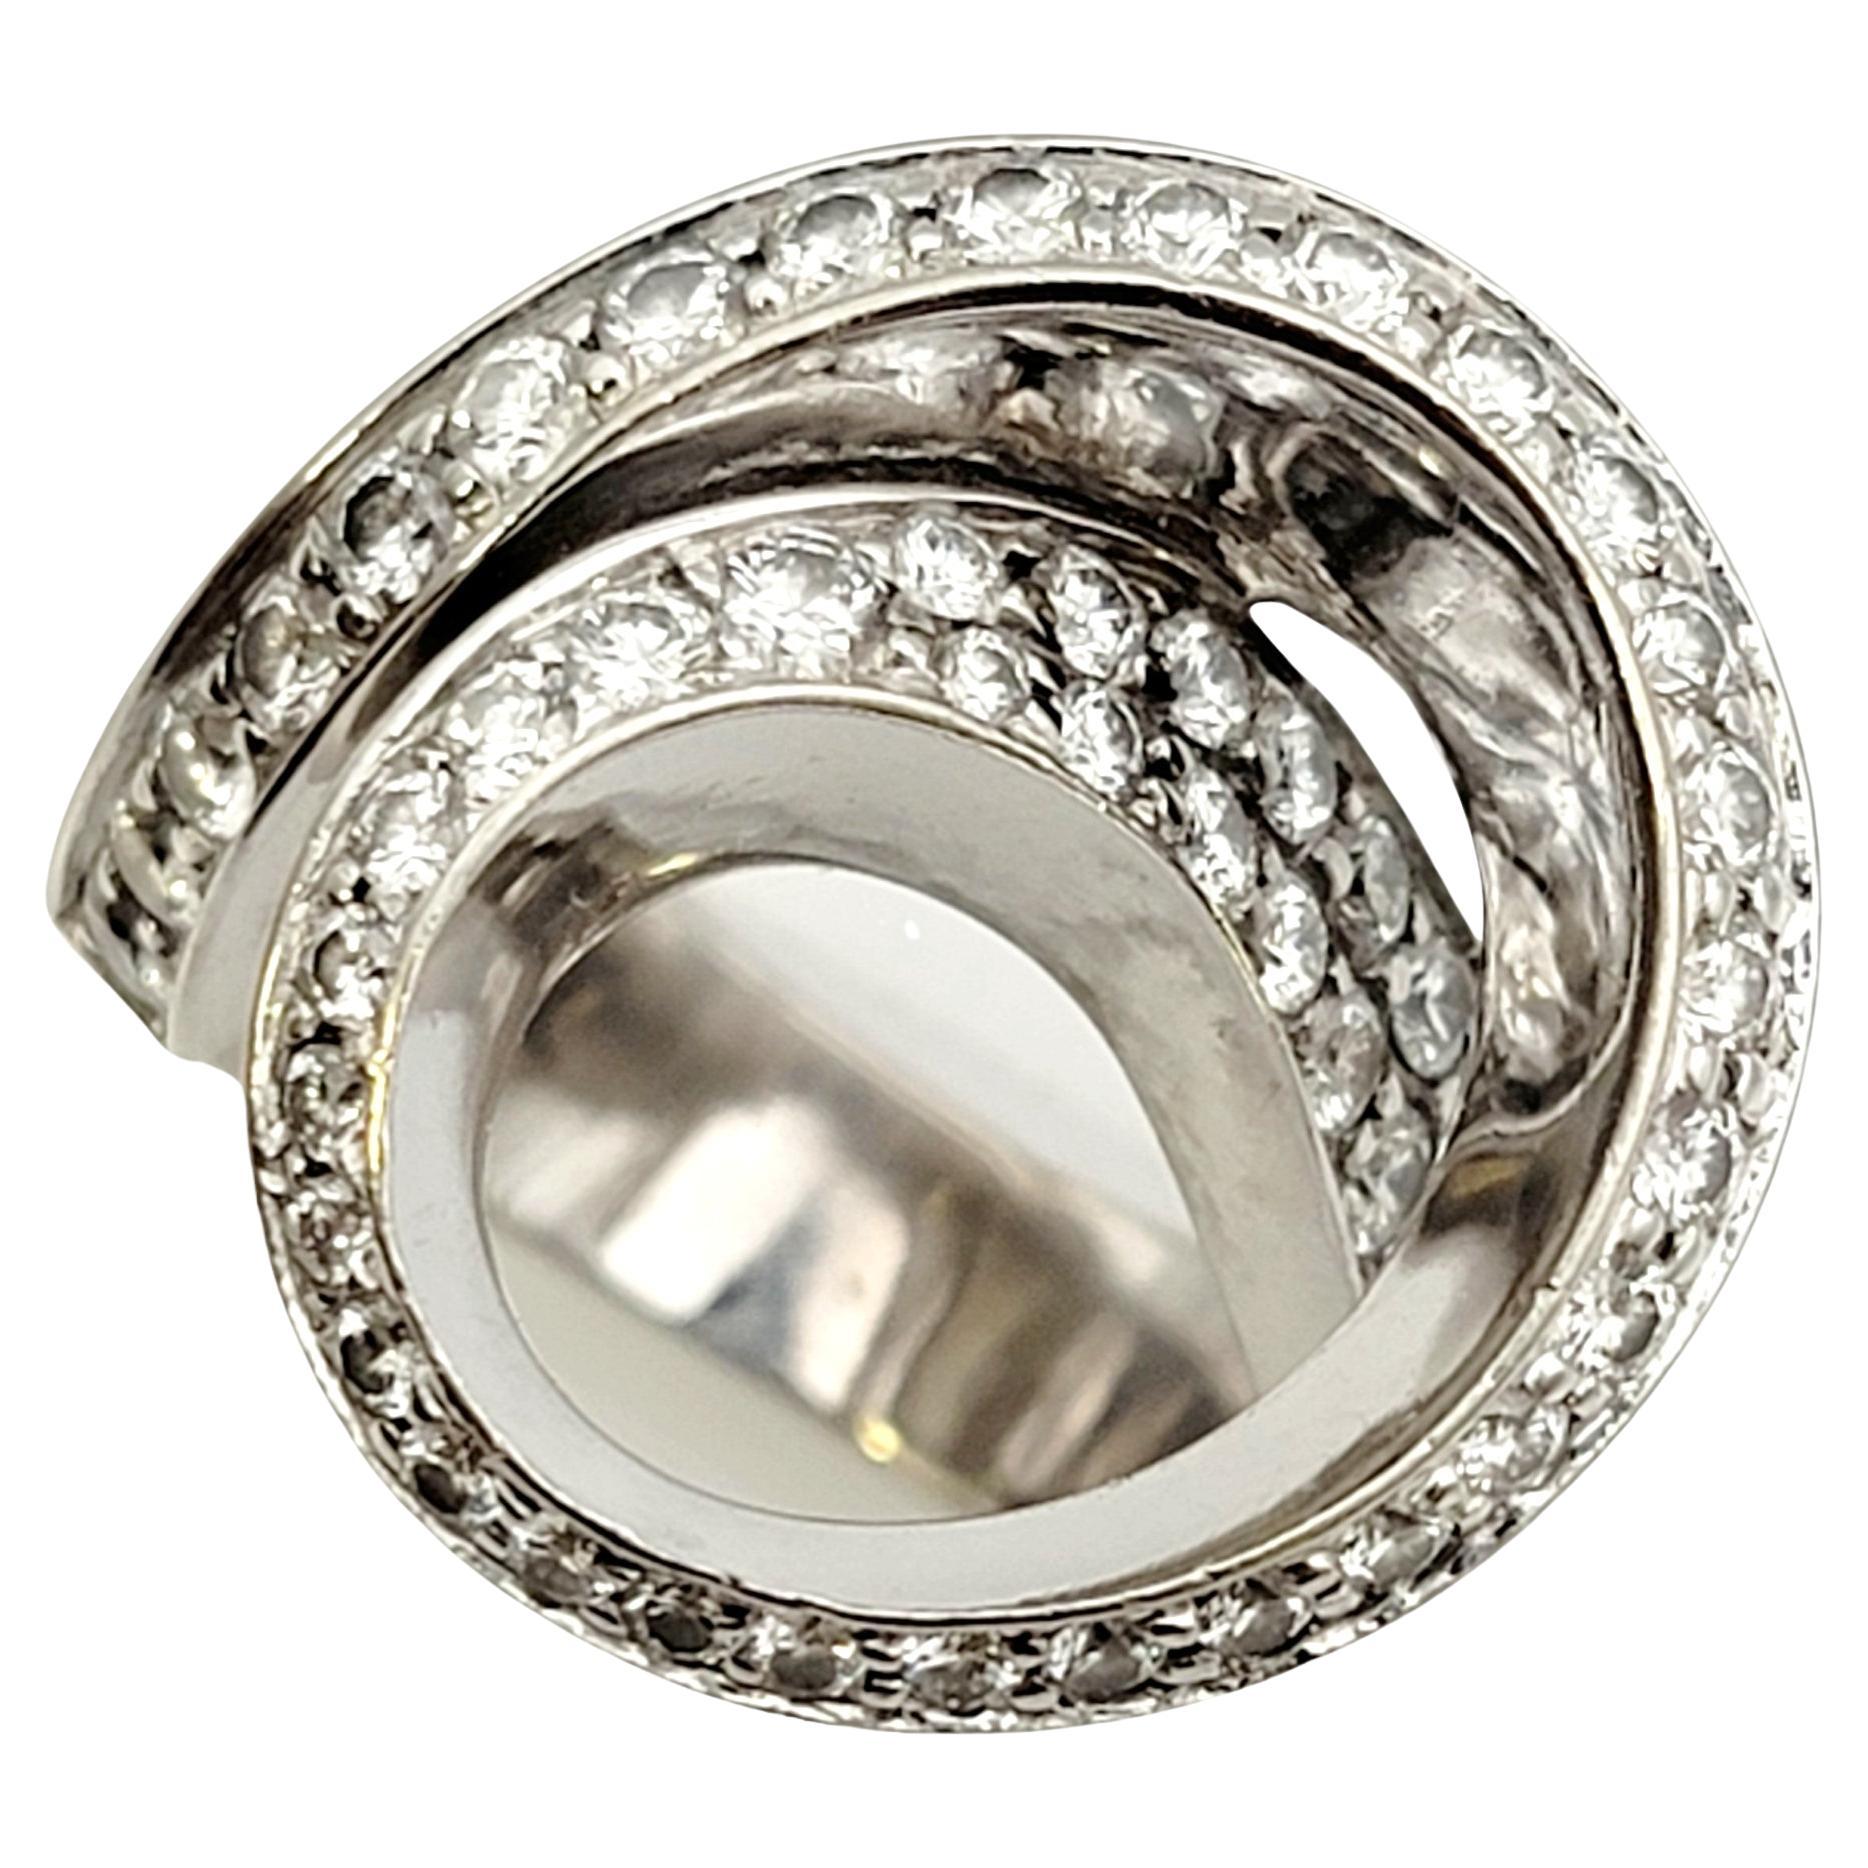 Ring size: 8

Gorgeous, one of a kind white gold swirl ring embellished with dazzling, bright white diamonds by designer Gauthier. This bold, artsy ring is set in an asymmetric open swirl pattern, sitting high off the finger and filling it with